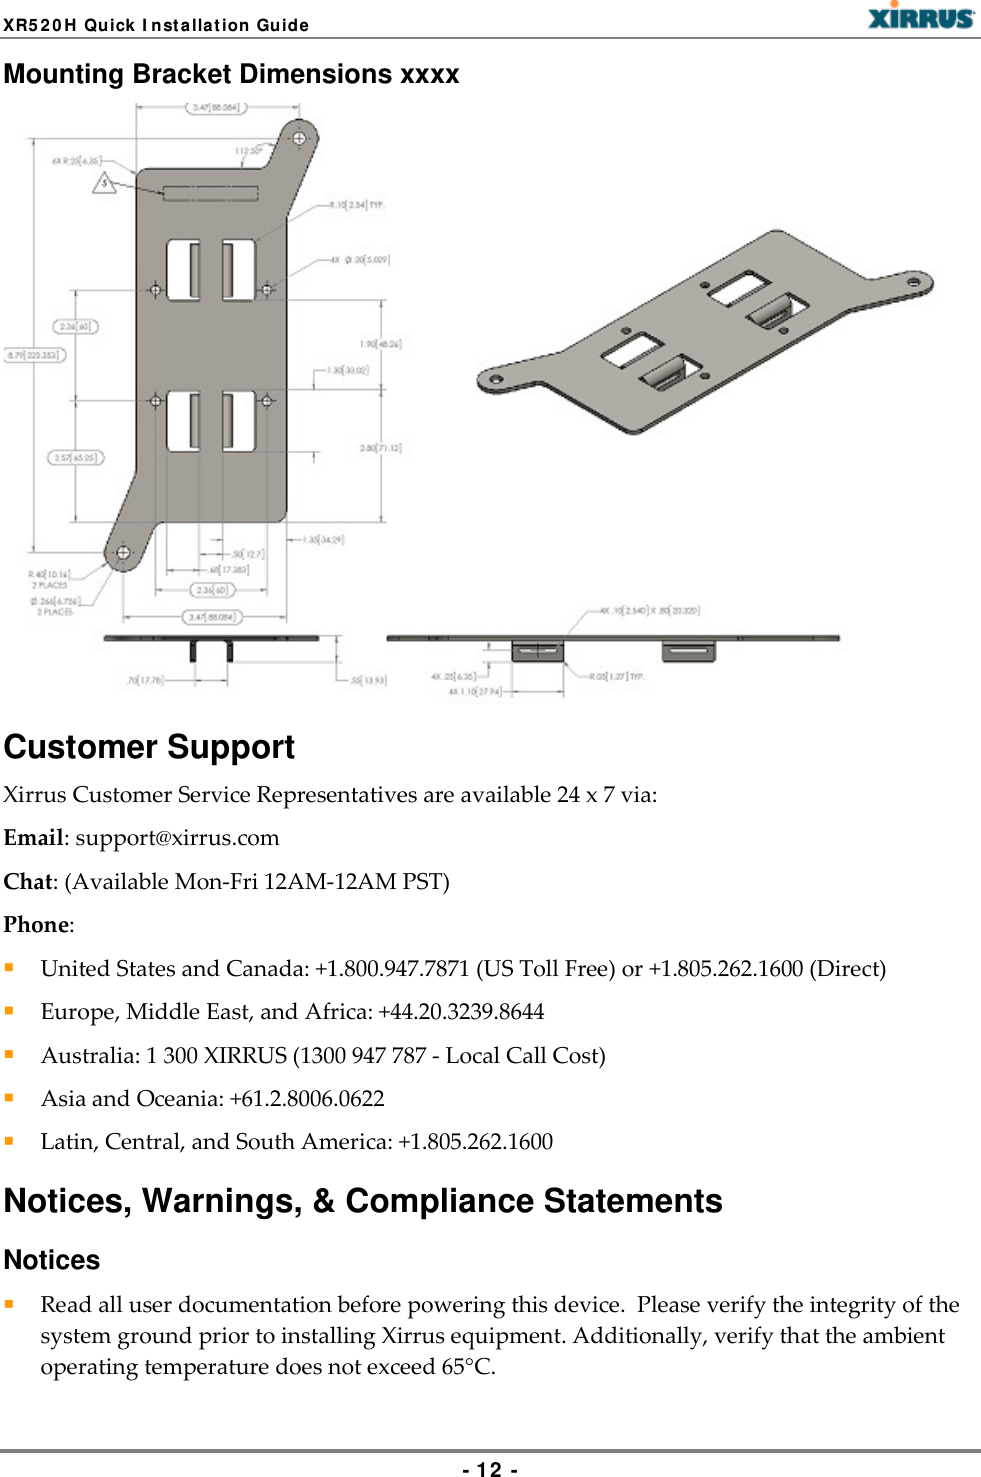 XR5 2 0 H Qu ick I nst a llat ion Guide   Mounting Bracket Dimensions xxxx  Customer Support Xirrus Customer Service Representatives are available 24 x 7 via:  Email: support@xirrus.com  Chat: (Available Mon-Fri 12AM-12AM PST)  Phone:   United States and Canada: +1.800.947.7871 (US Toll Free) or +1.805.262.1600 (Direct)   Europe, Middle East, and Africa: +44.20.3239.8644   Australia: 1 300 XIRRUS (1300 947 787 - Local Call Cost)   Asia and Oceania: +61.2.8006.0622   Latin, Central, and South America: +1.805.262.1600  Notices, Warnings, &amp; Compliance Statements Notices  Read all user documentation before powering this device.  Please verify the integrity of the system ground prior to installing Xirrus equipment. Additionally, verify that the ambient operating temperature does not exceed 65°C.  - 12  - 